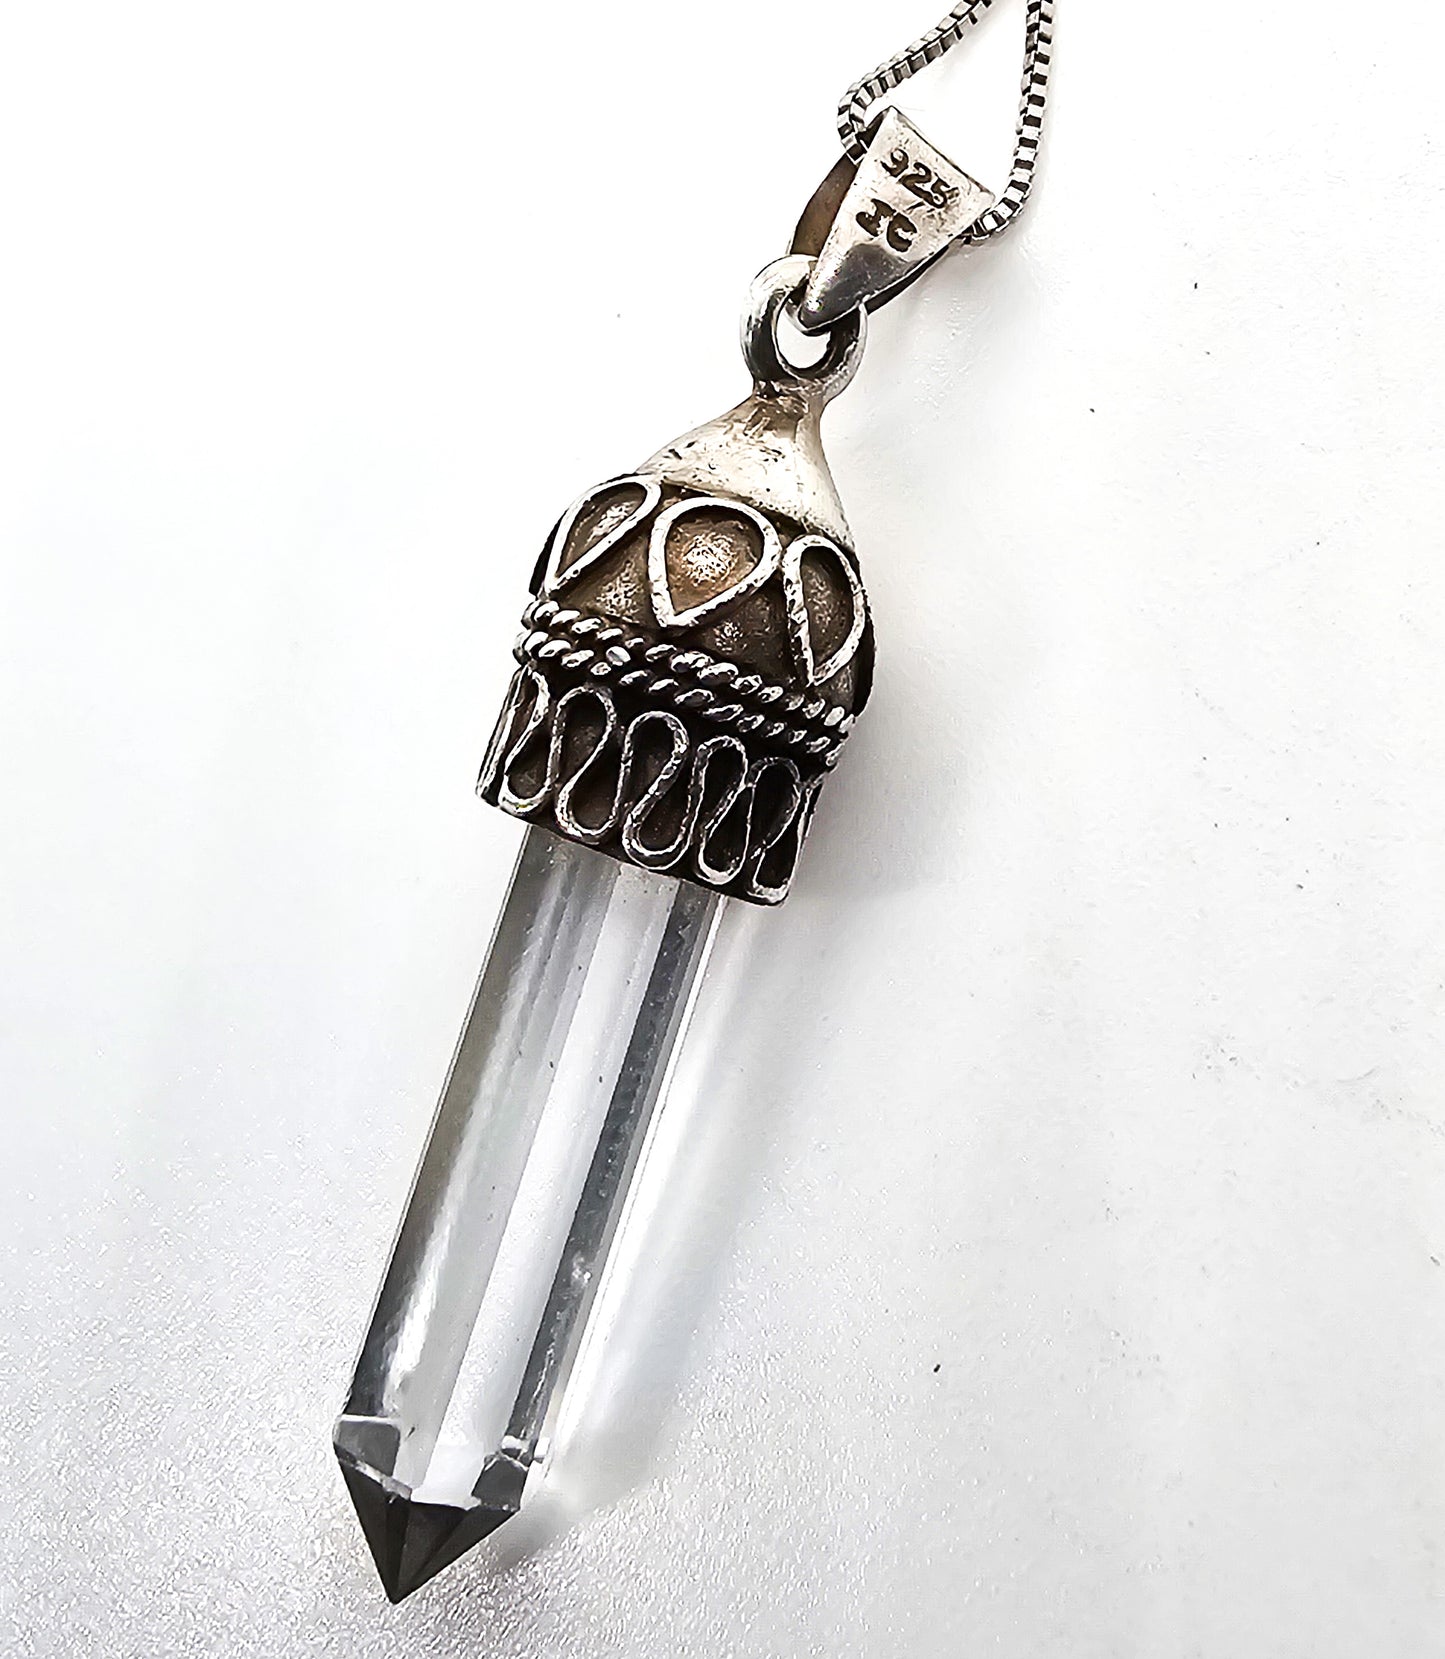 Terminated clear quartz JC Balinese Bali style sterling silver vintage pendant necklace